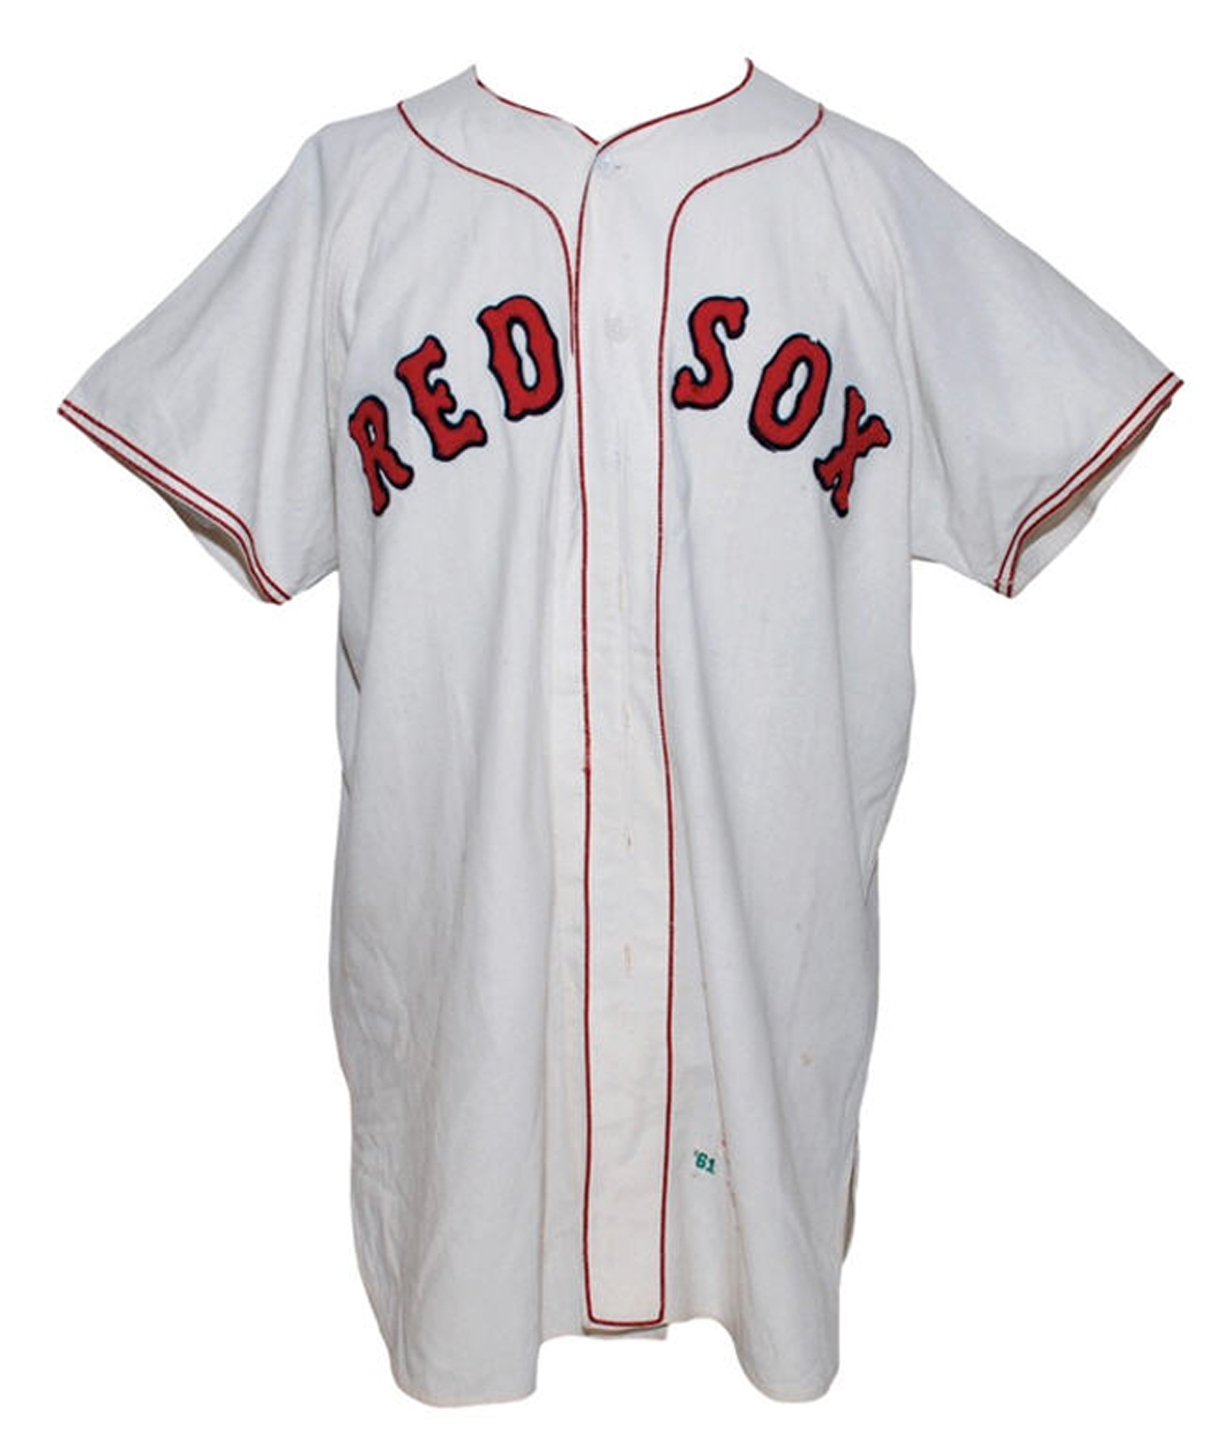 red sox home jersey